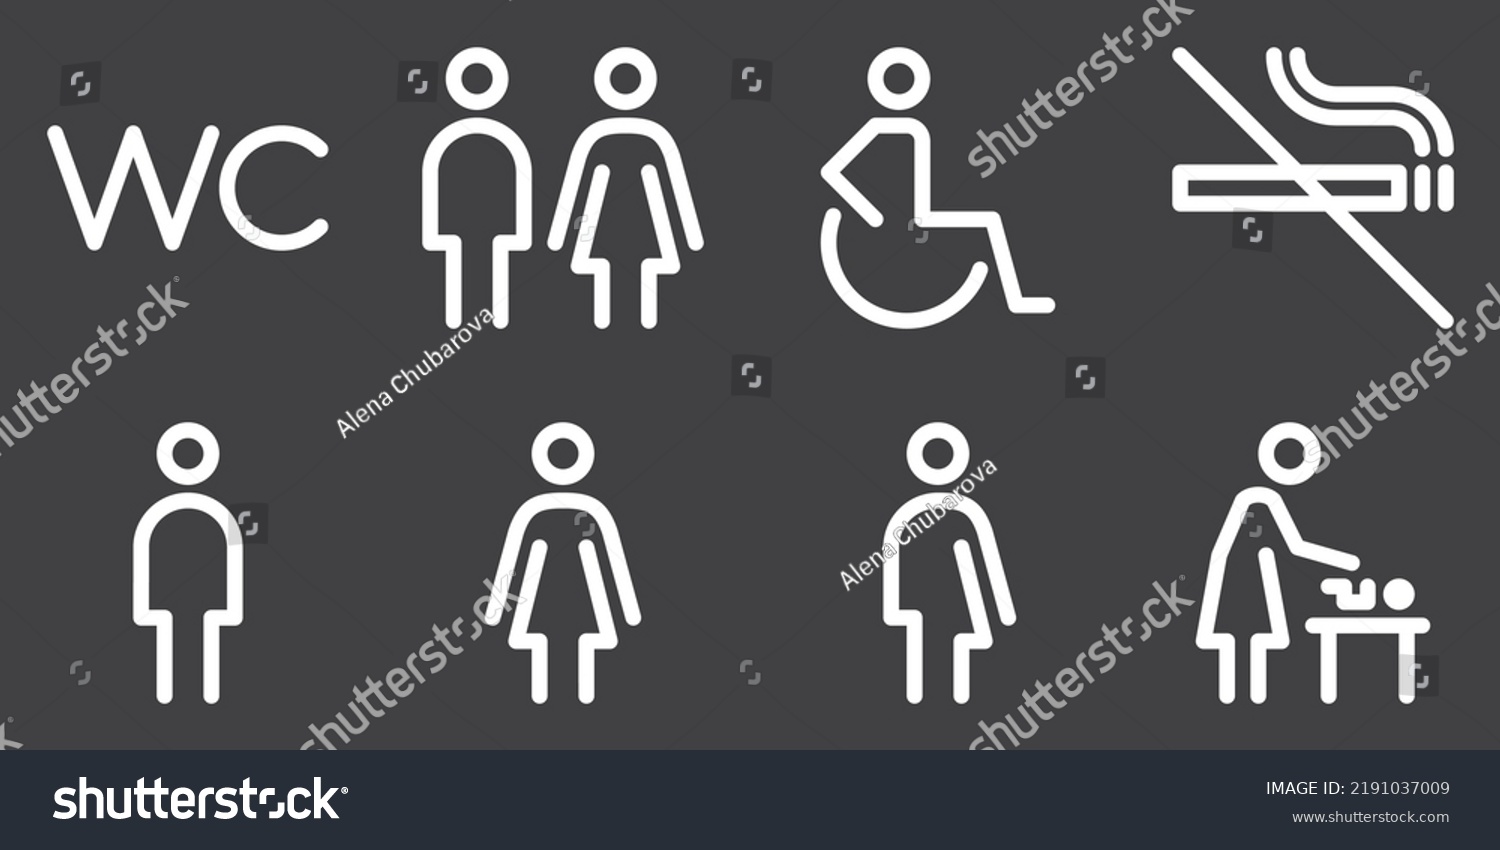 Toilet line icon set. WC sign. Man,woman,mother with baby and handicap symbol. Restroom for male, female, transgender, disabled. Editable stroke. Vector graphics #2191037009